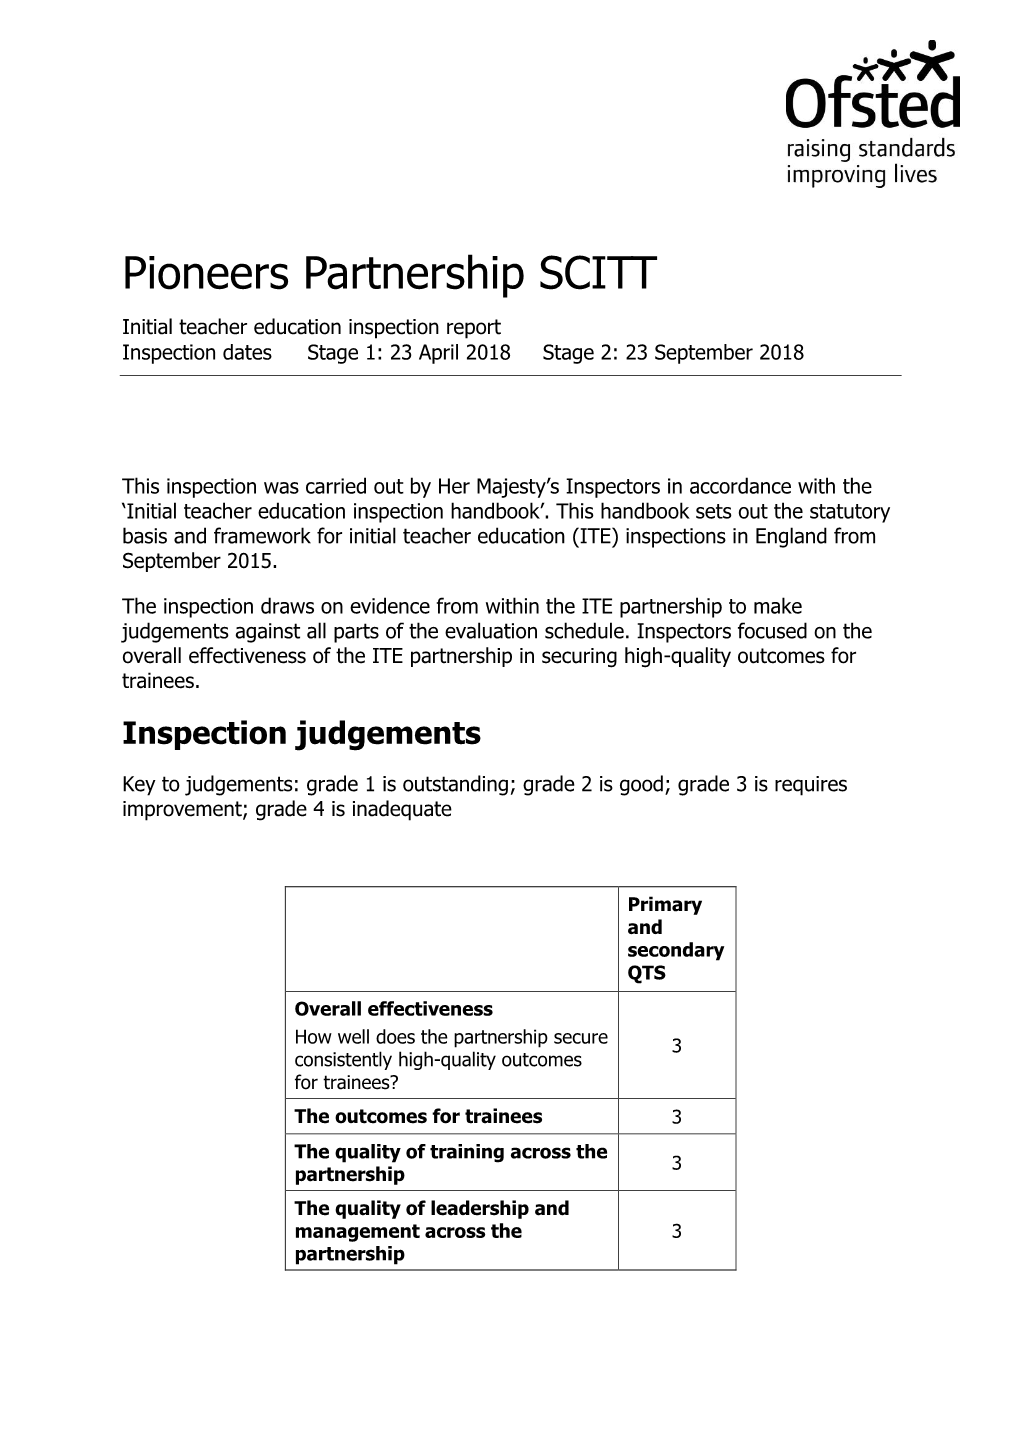 Pioneers Partnership SCITT Initial Teacher Education Inspection Report Inspection Dates Stage 1: 23 April 2018 Stage 2: 23 September 2018